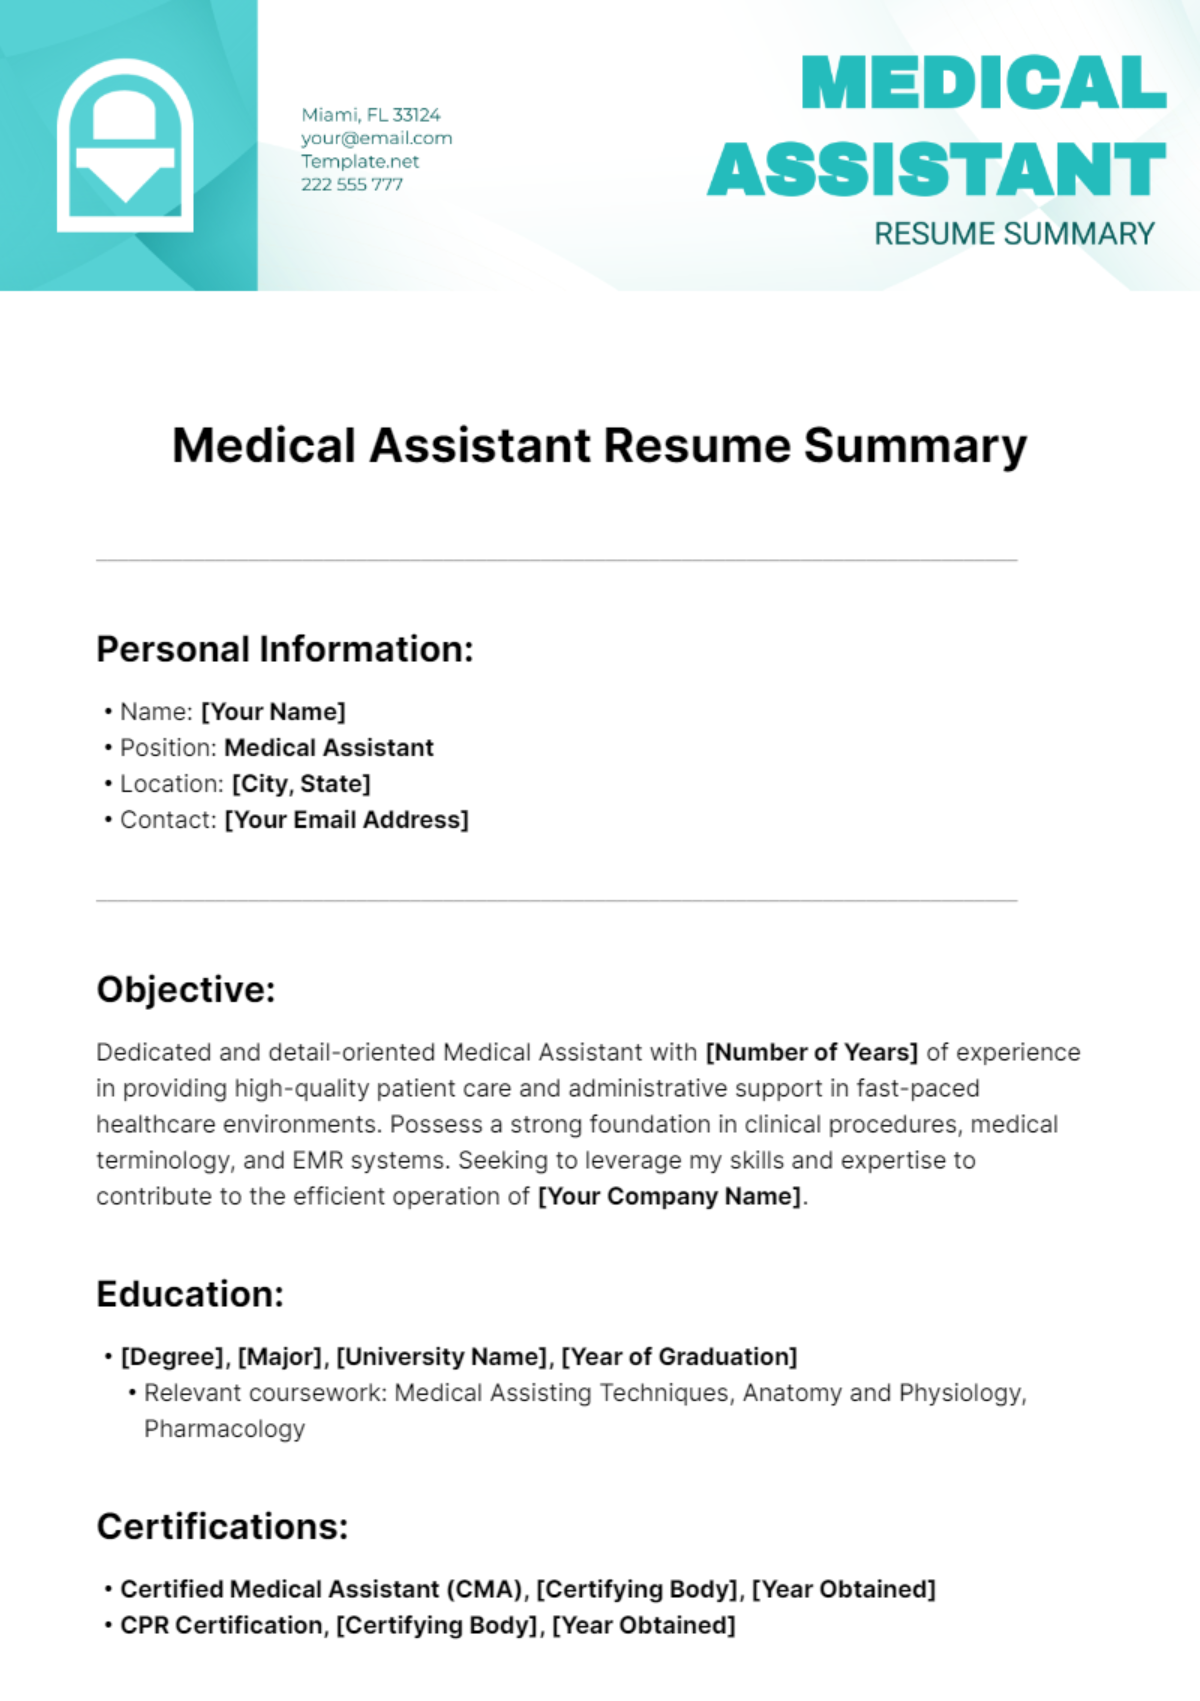 Medical Assistant Resume Summary Template